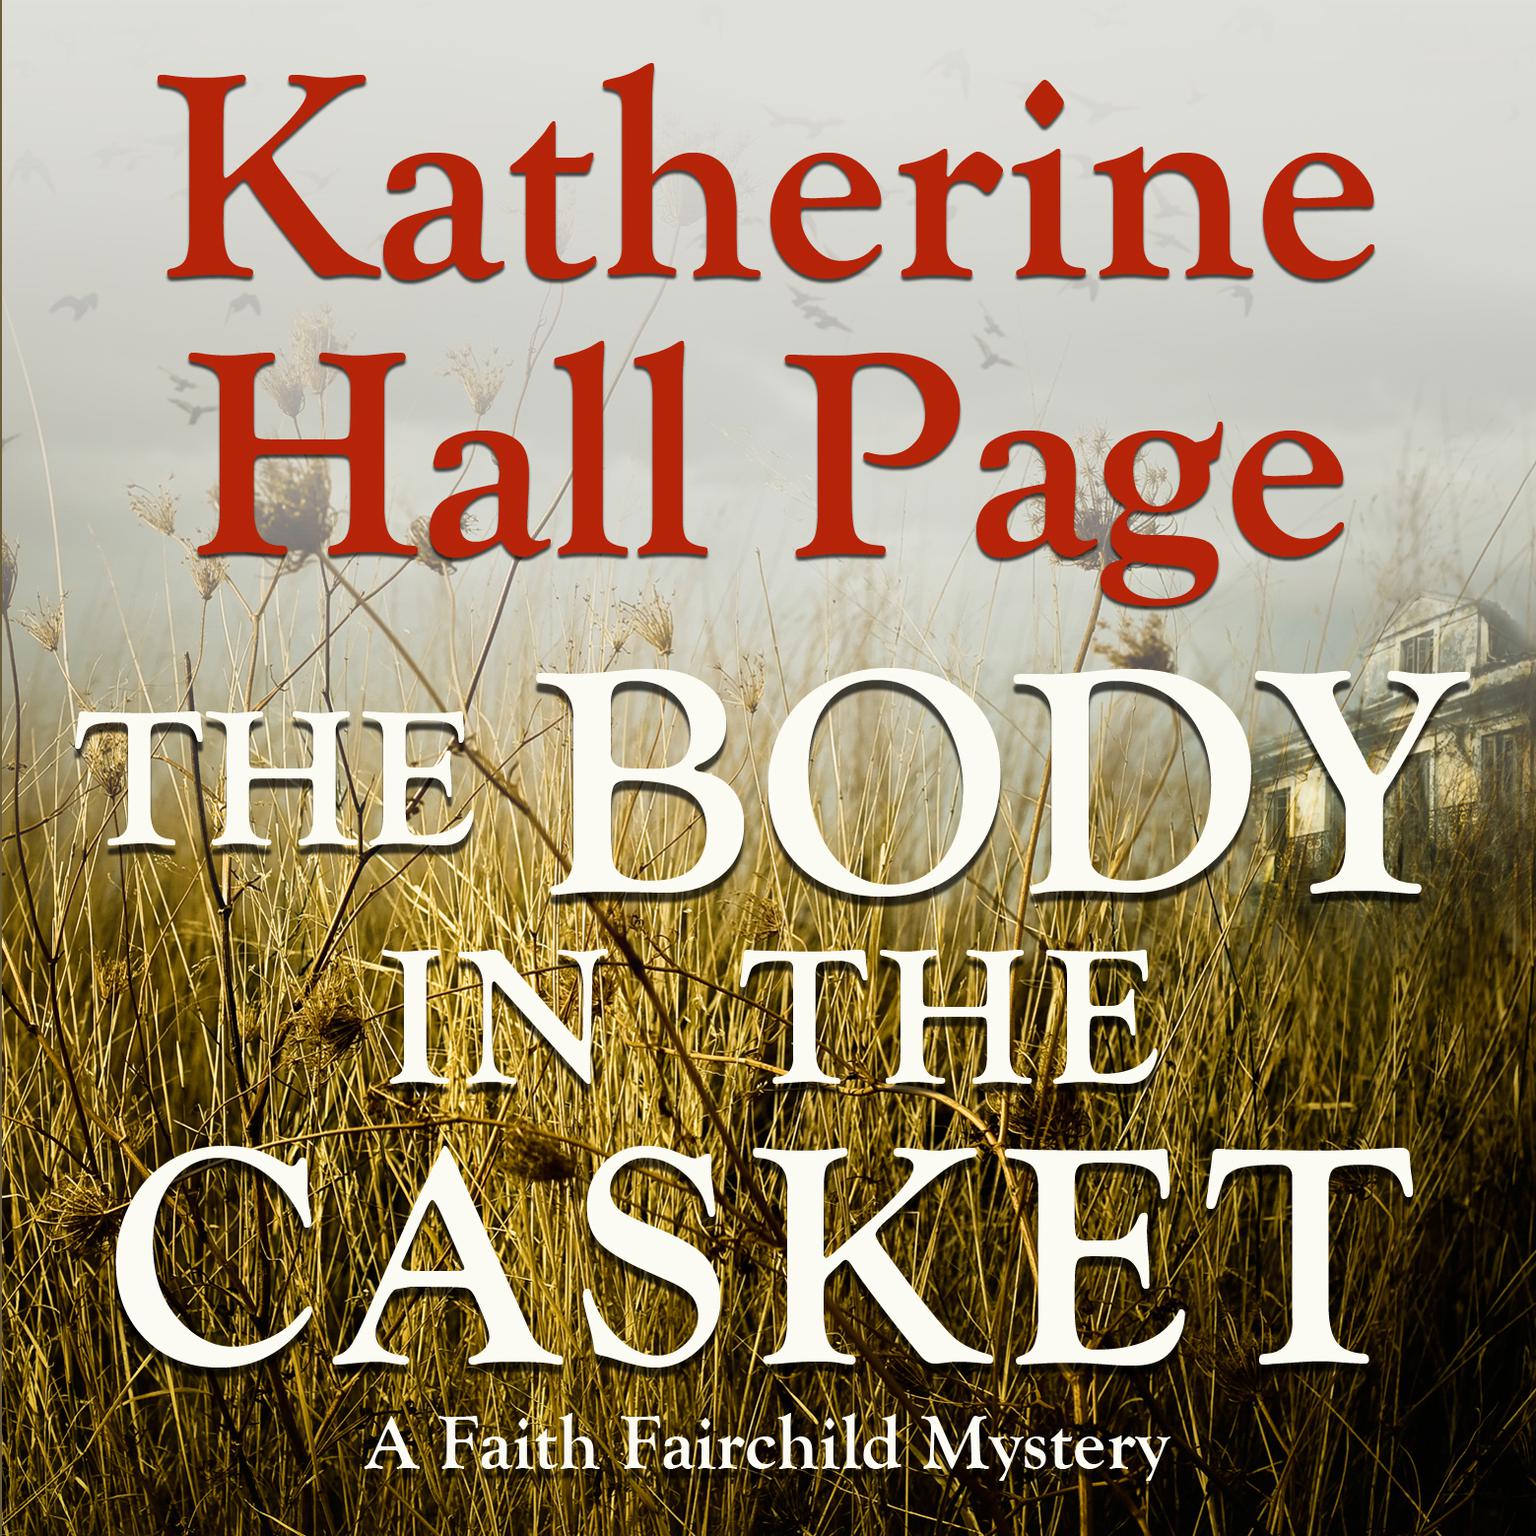 The Body in the Casket: A Faith Fairchild Mystery Audiobook, by Katherine Hall Page